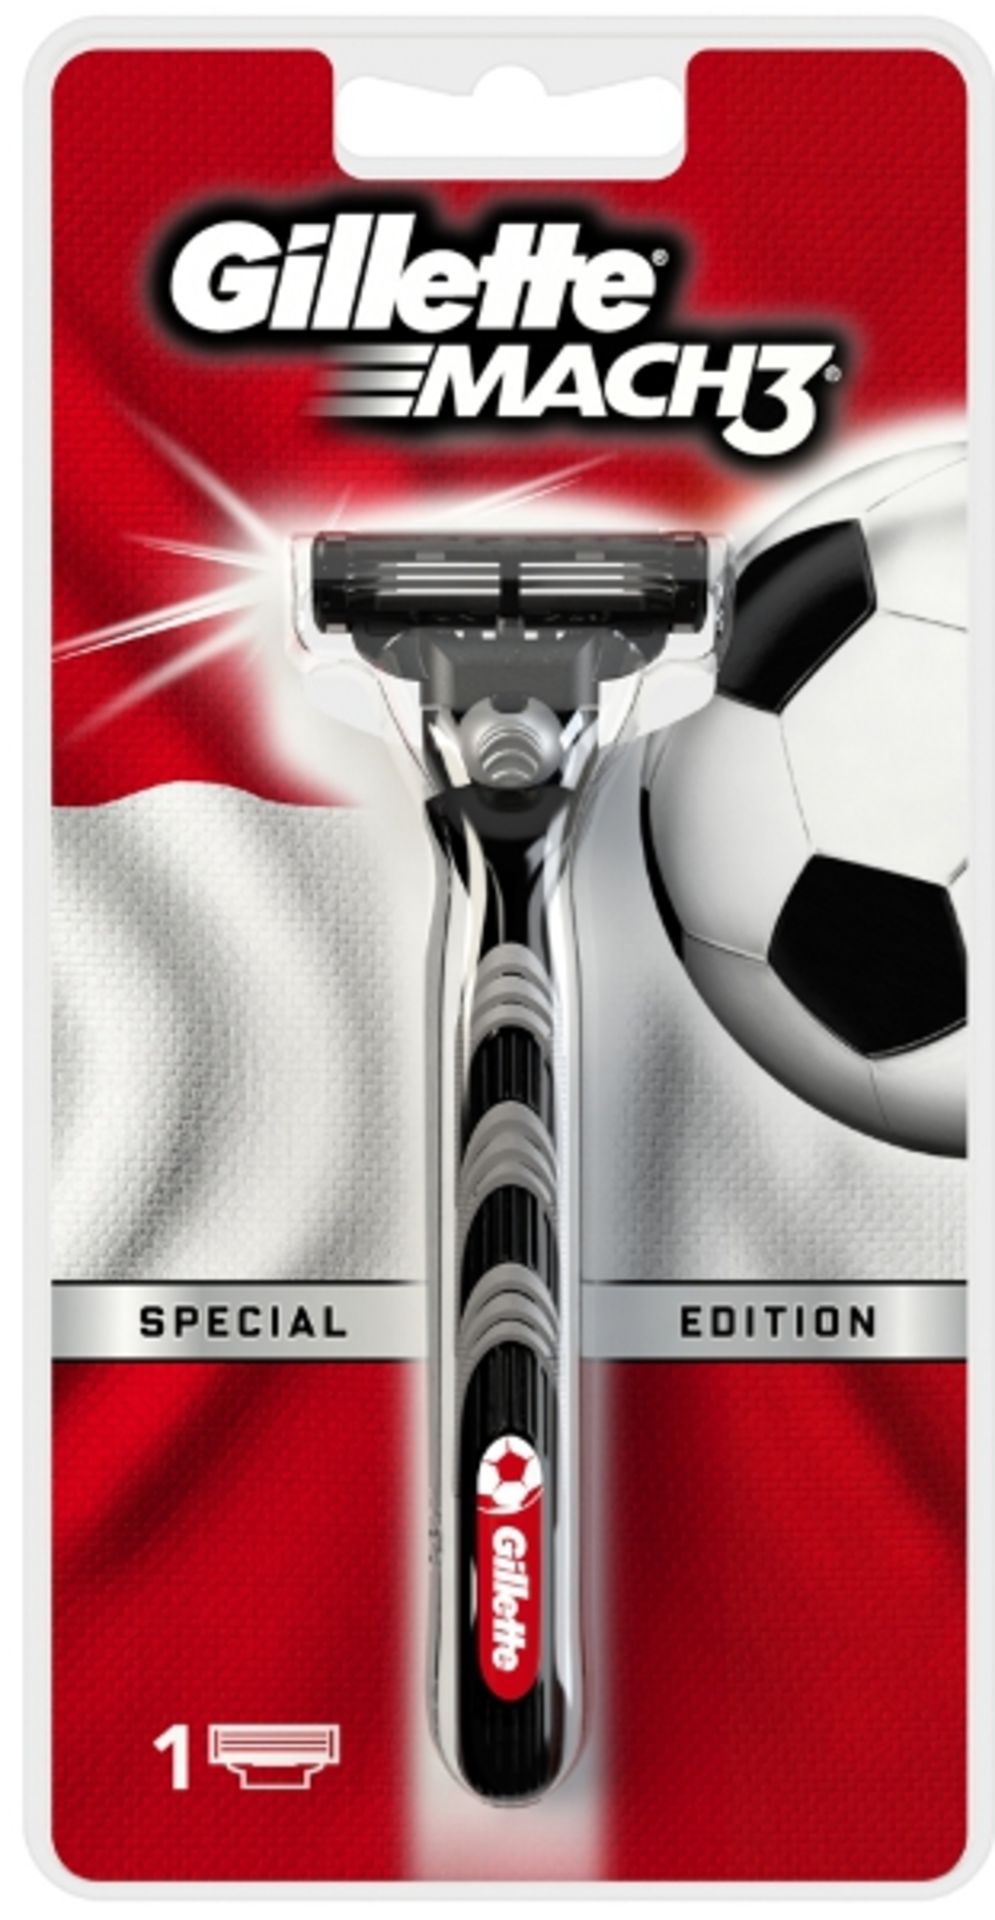 V *TRADE QTY* Brand New Gillette Mach3 Football Special Edition X 8 YOUR BID PRICE TO BE